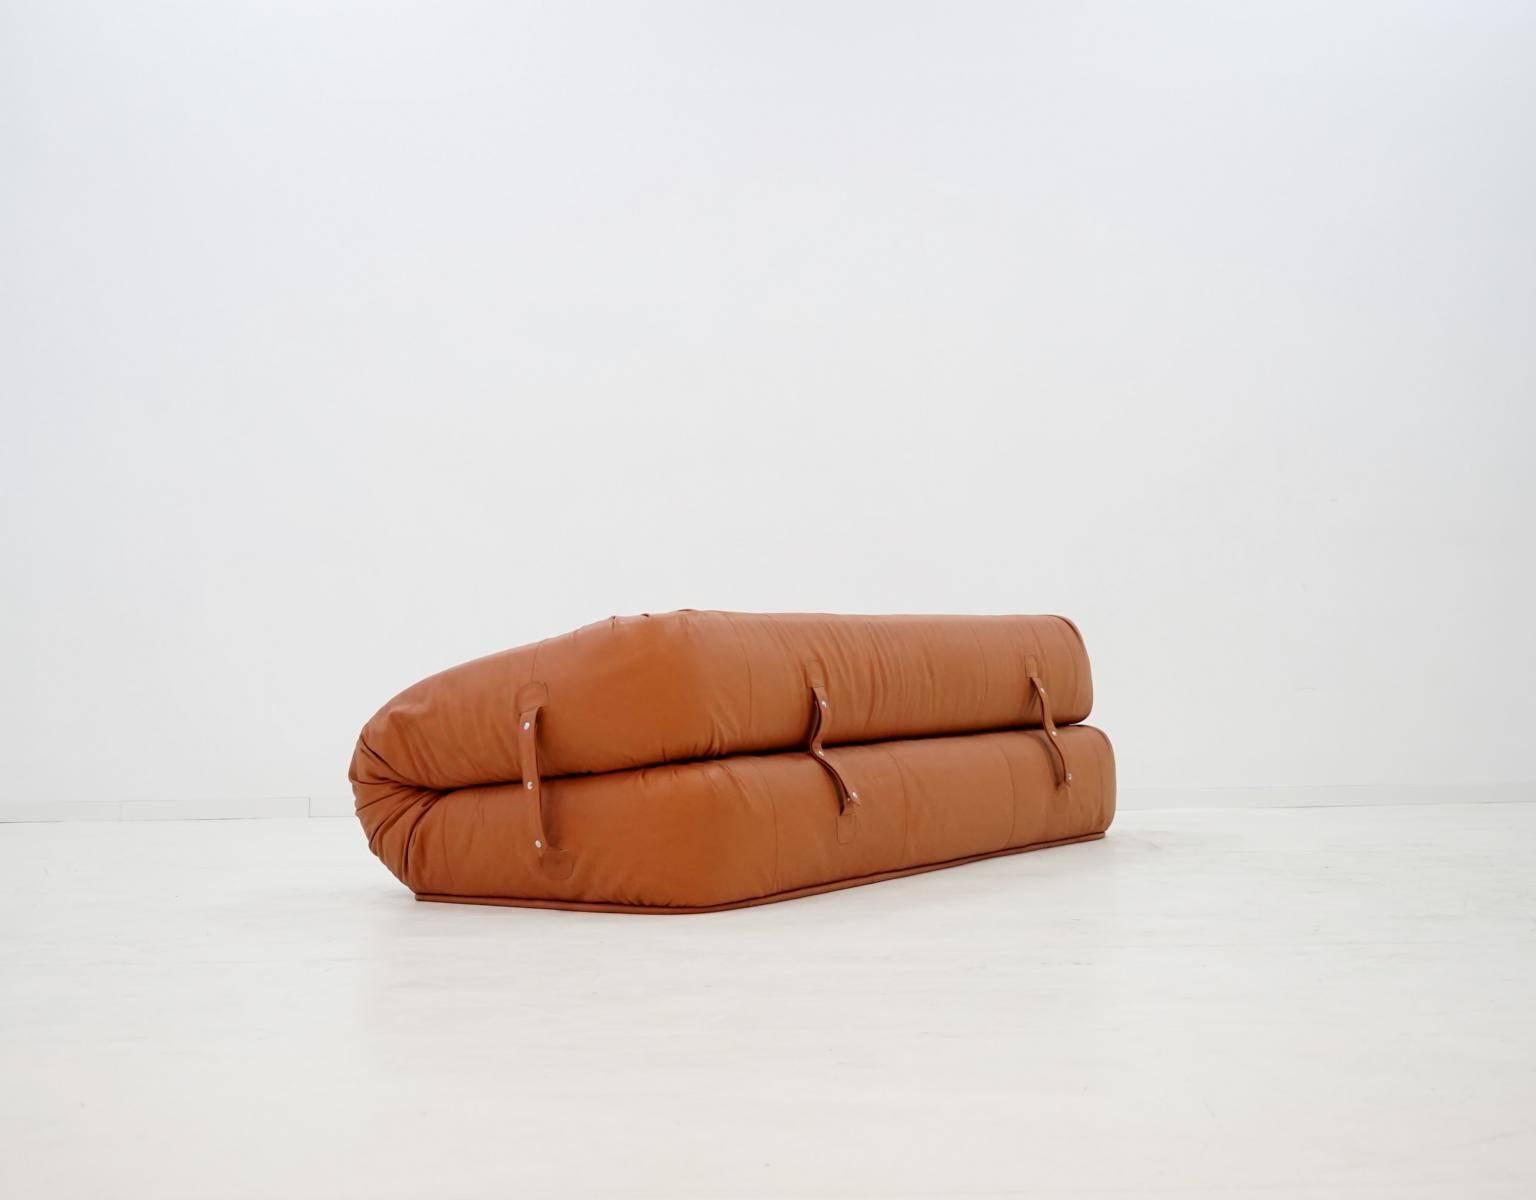 Anfibio by Alessandro Becchi, Giovannetti Italy Sofa Daybed Canapé Couch Leather 1